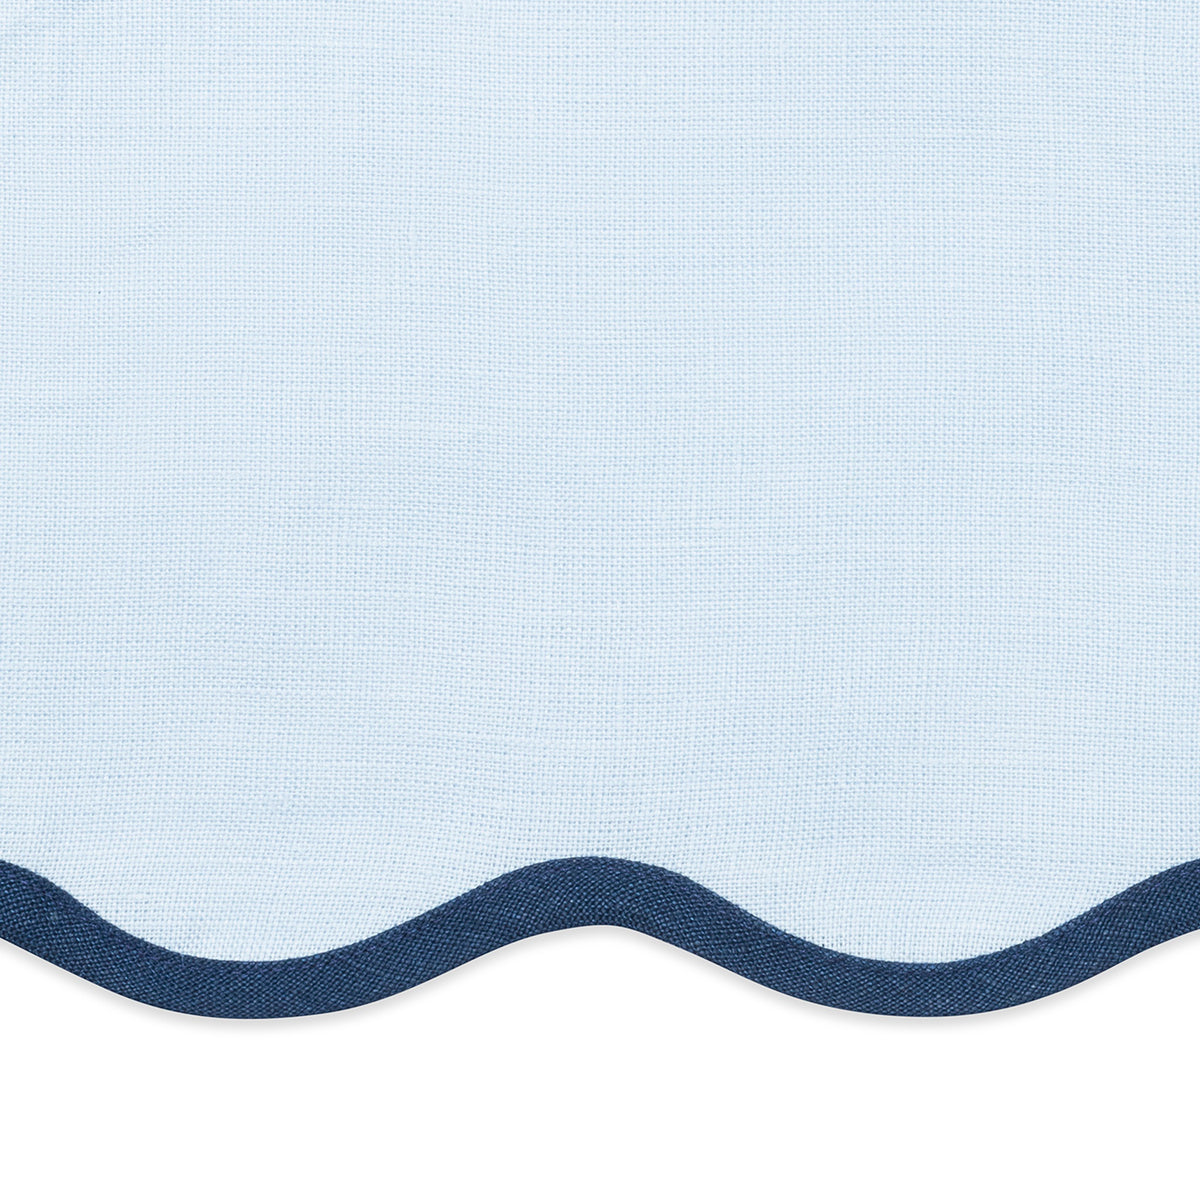 Swatch Sample of Matouk Scallop Edge Table Linens in Ice Blue/Navy Color